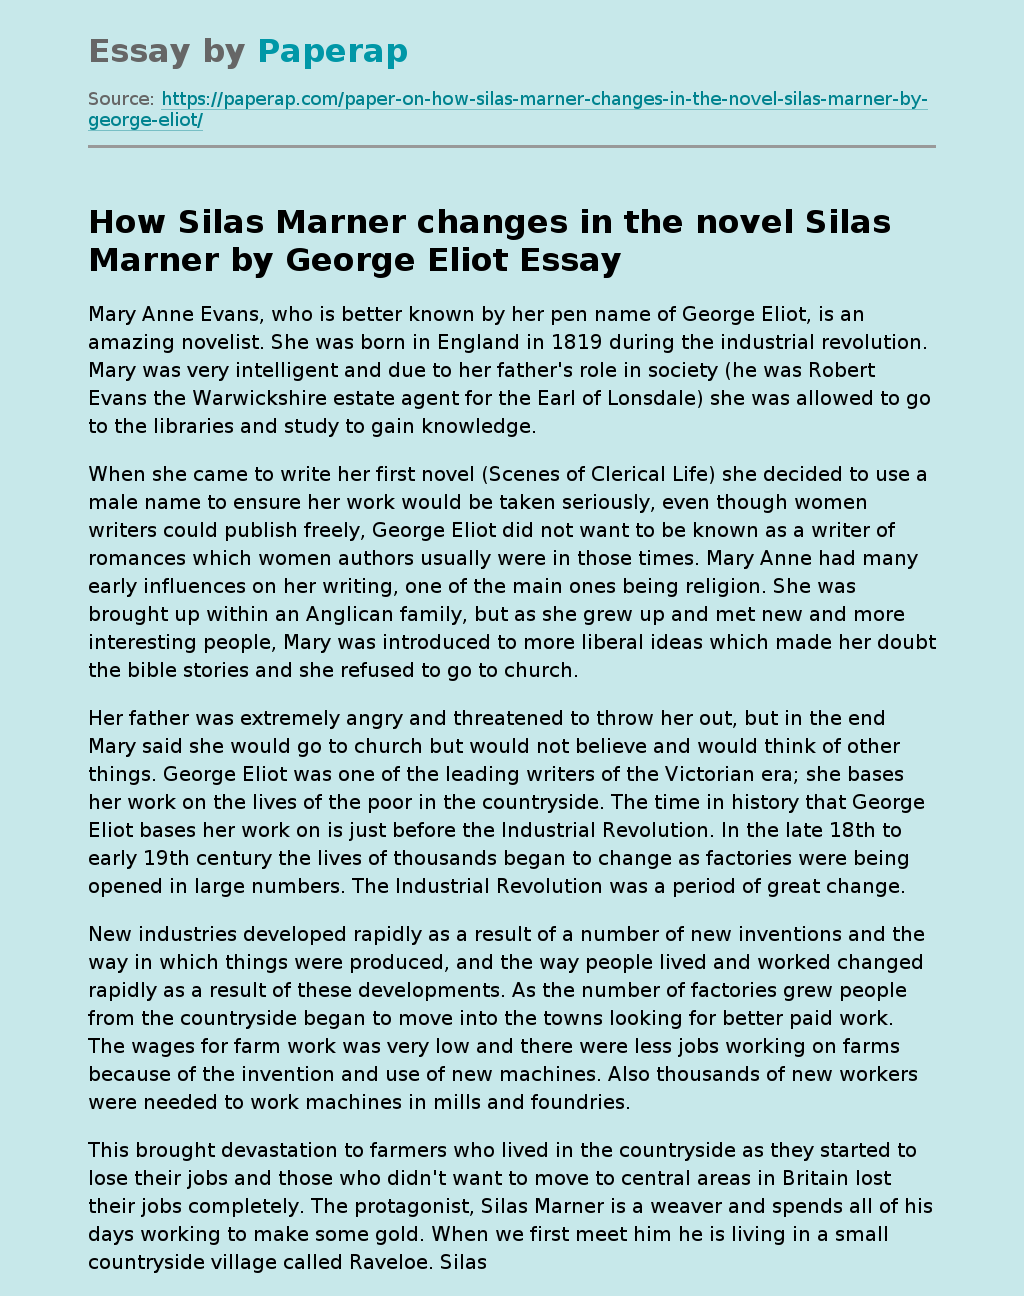 How Silas Marner changes in the novel Silas Marner by George Eliot